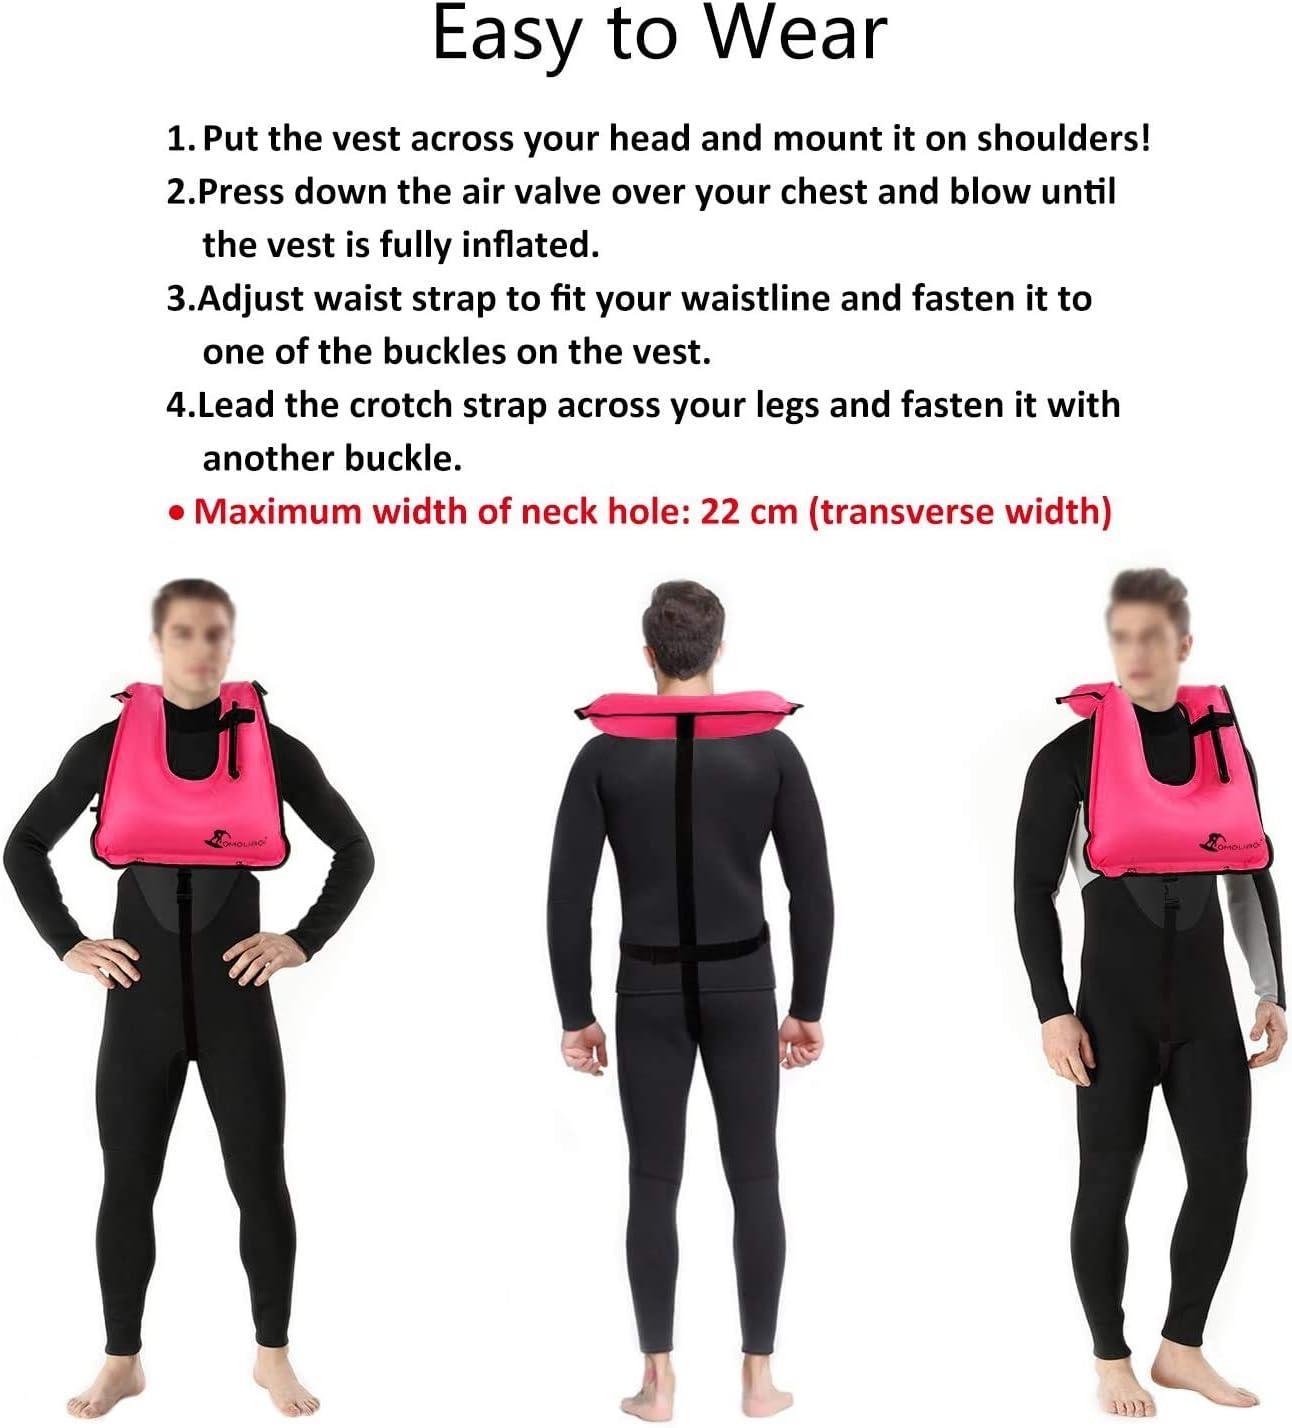 OMOUBOI Snorkel Vest for Adults Swim Vests Inflatable Snorkeling Jackets  for Diving, Snorkeling, Swimming Safety (Suitable for 100-220 lbs) Rose-red